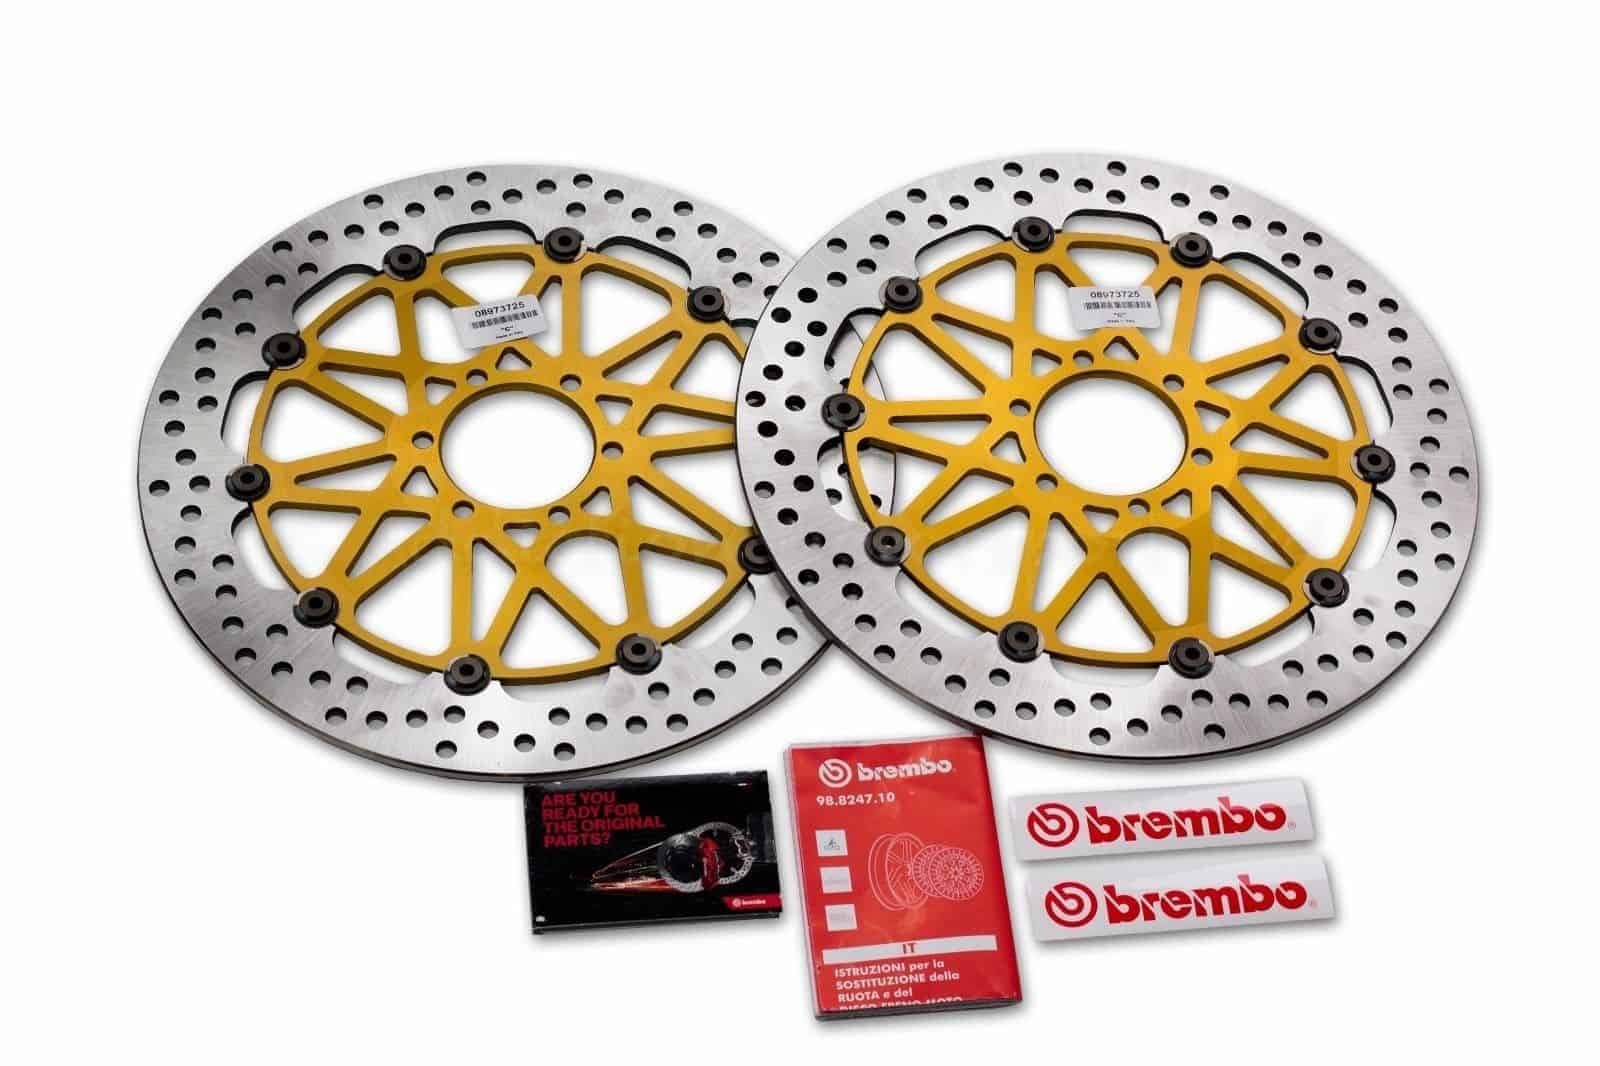 DISQUES BREMBO SUPERSPORT 330MM DUCATI PANIGALE 1199 / 1299 (208B85911)